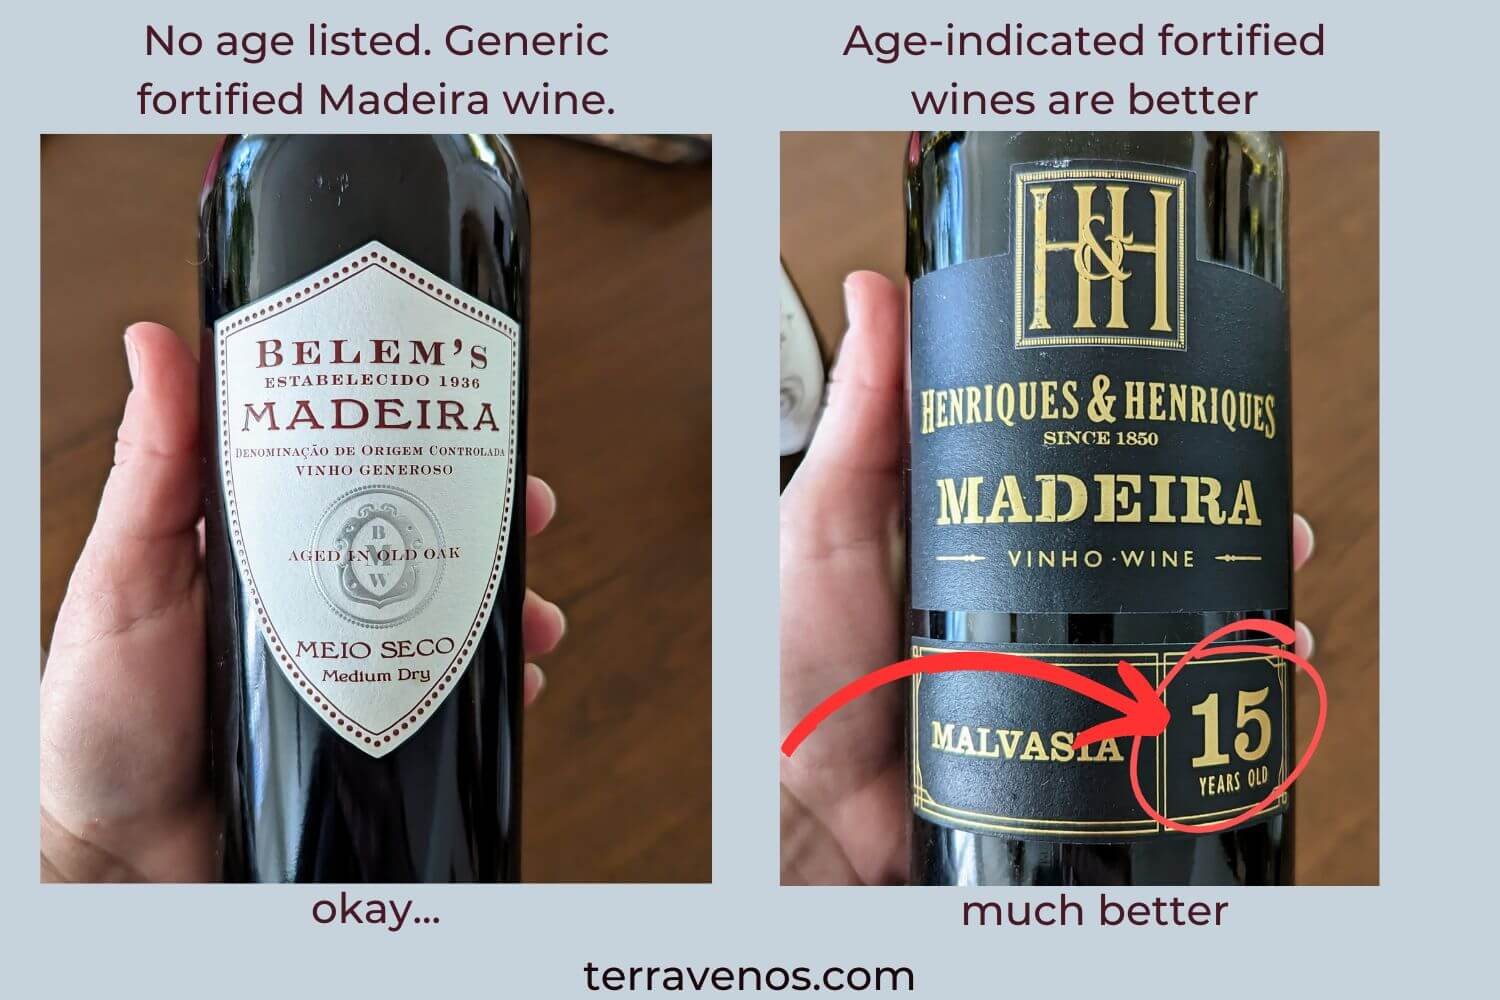 how to know if a fortfied wine is good madeira vs aged madeira